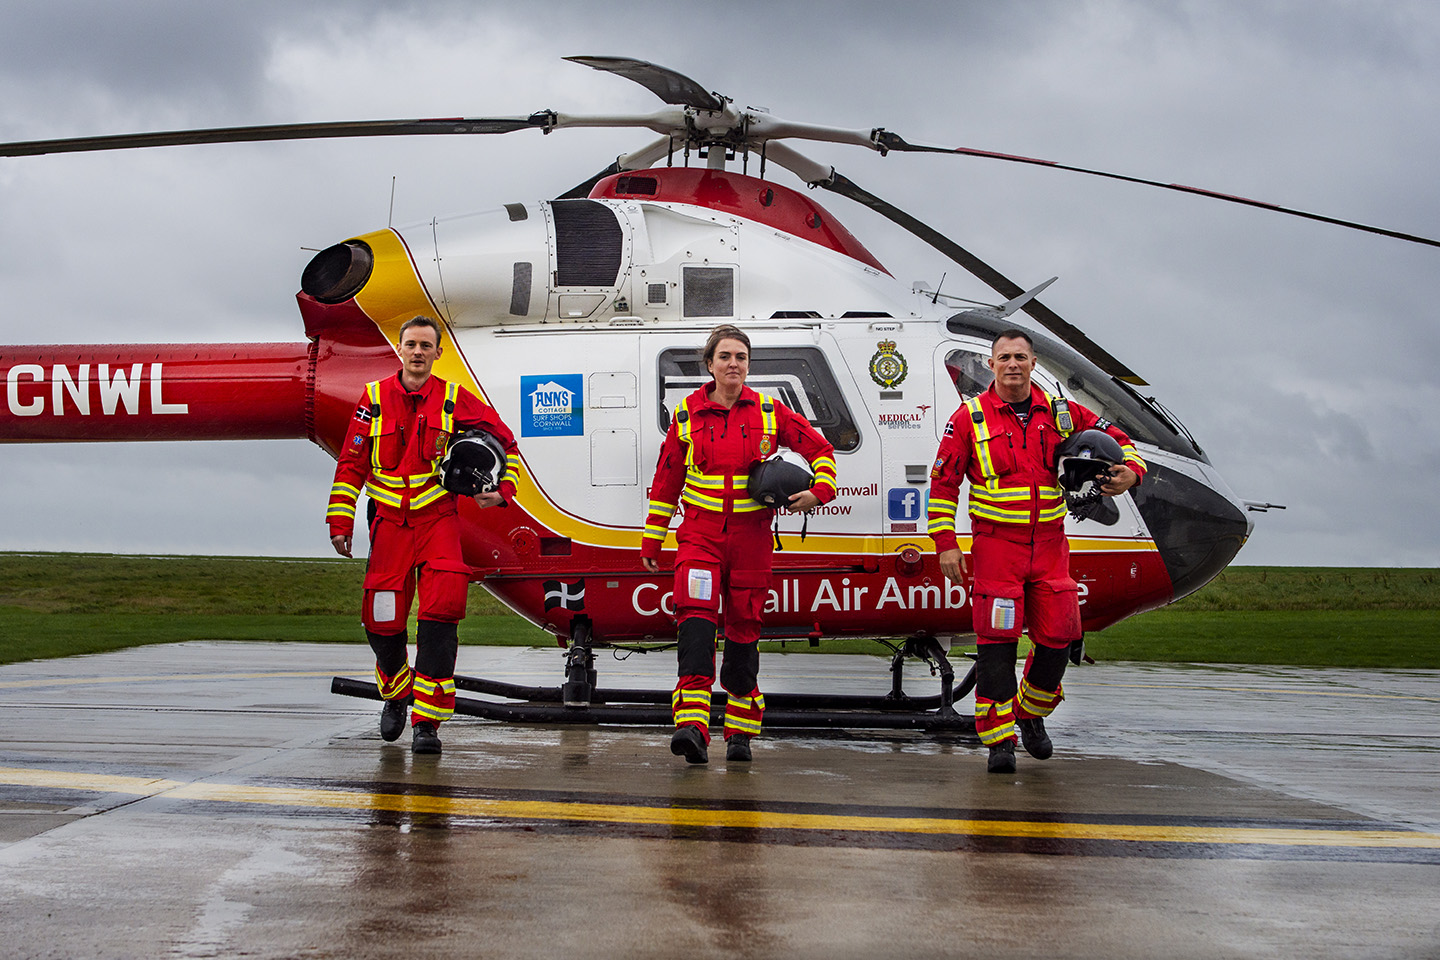 Three Cornwall Air Ambulance paramedics walking away from the helicopter on the landing pad